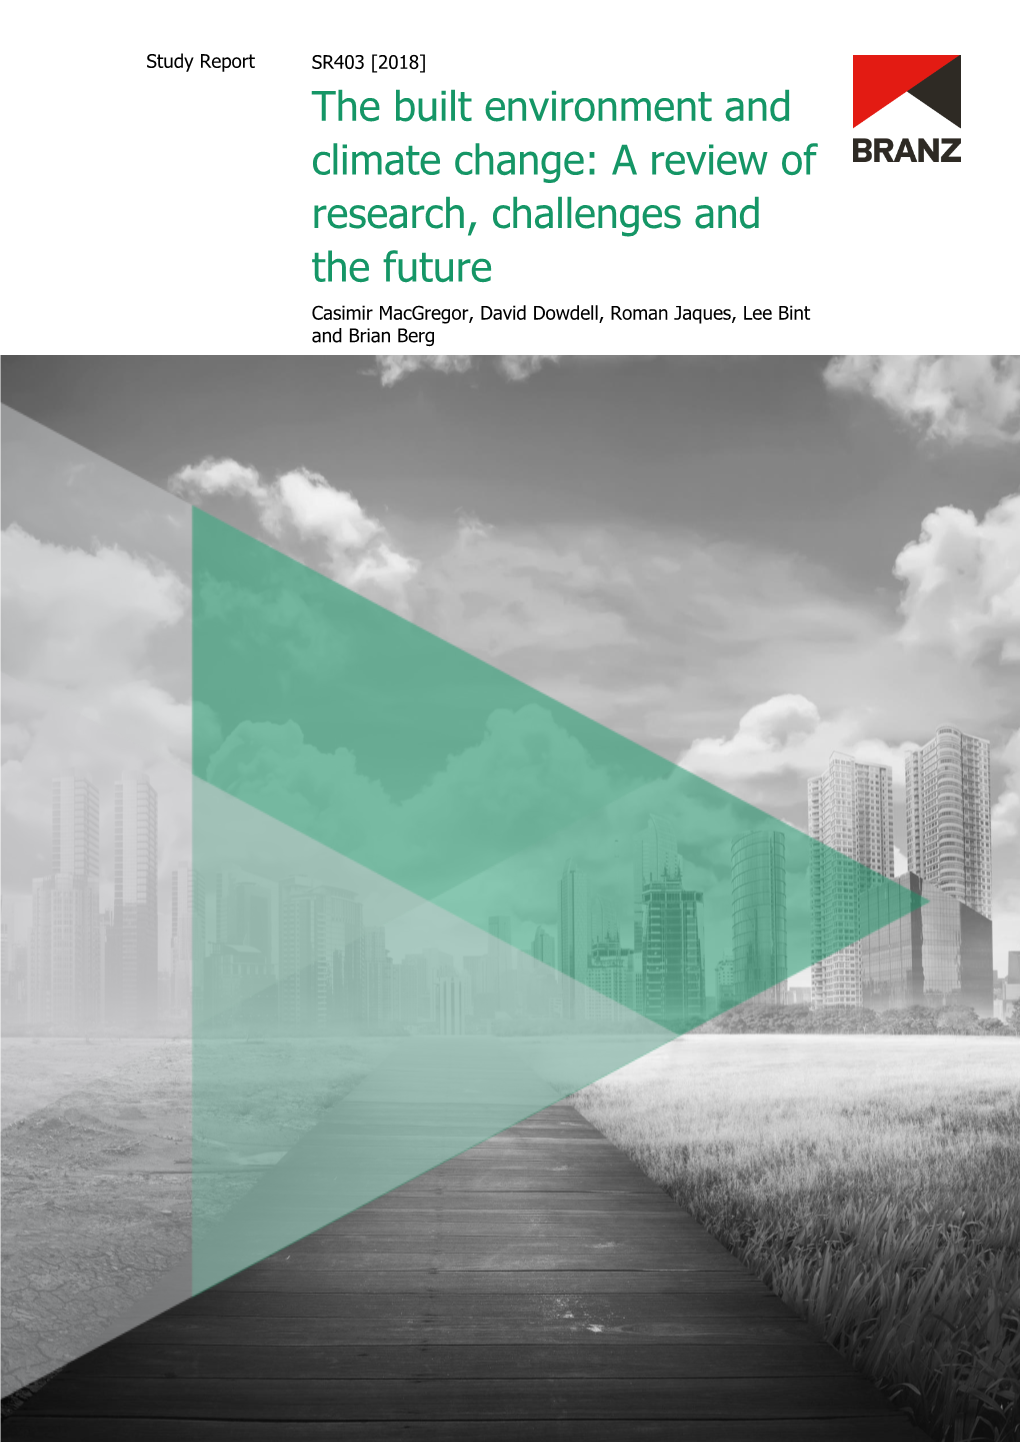 Study Report SR403 the Built Environment and Climate Change: a Review of Research, Challenges and the Future